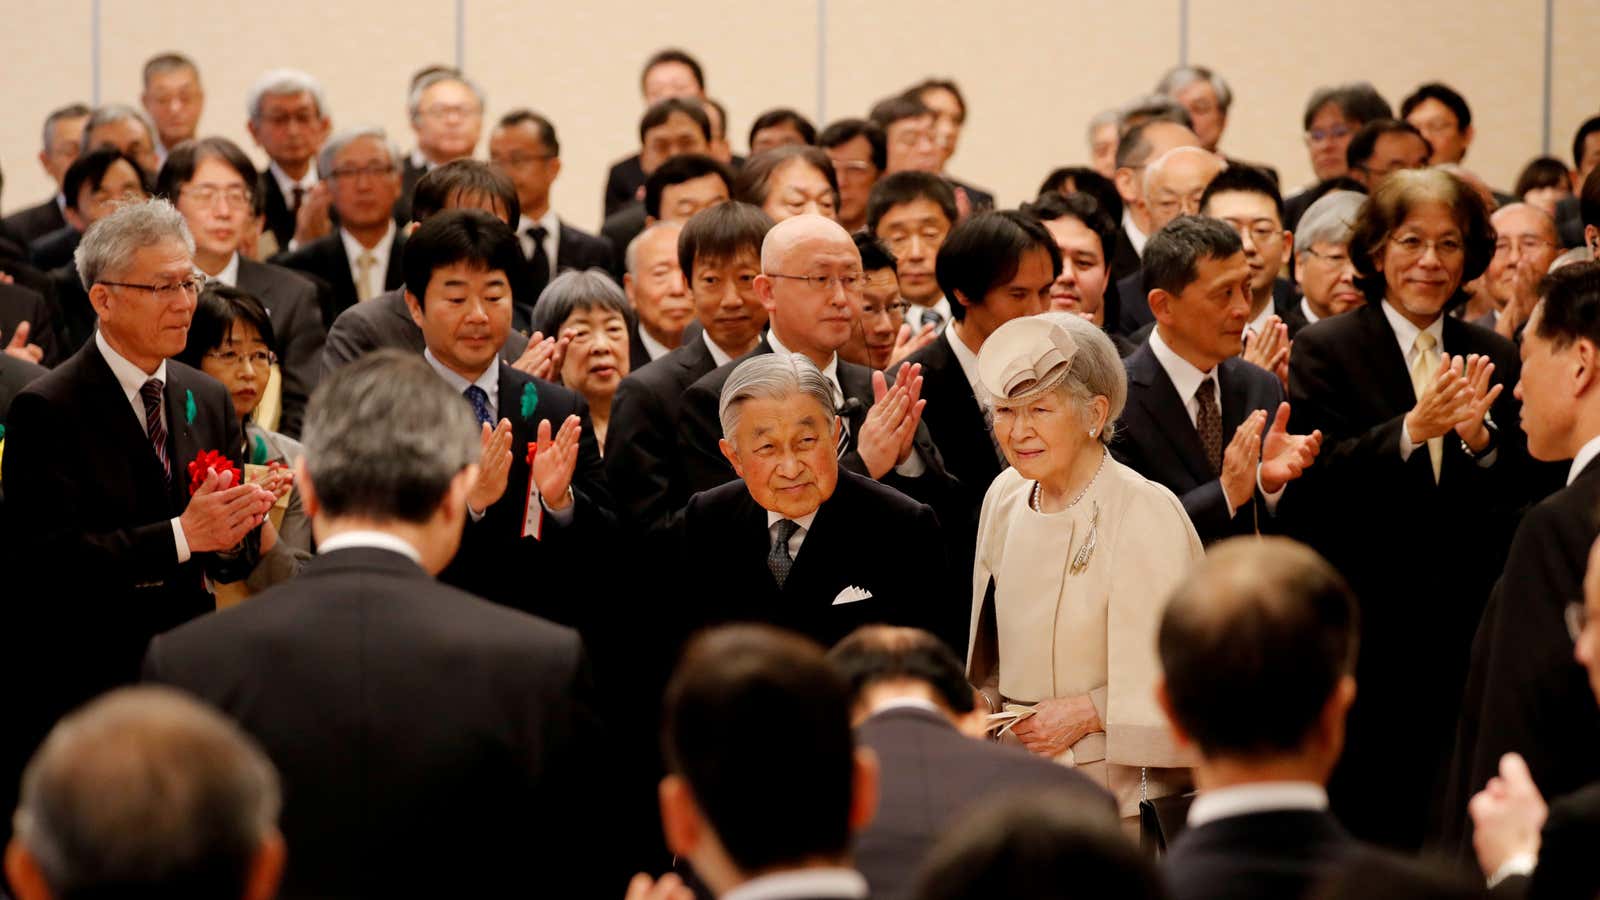 Japan’s Emperor Akihito and Empress Michiko are greeted as they attend a reception for the Midori Academic Prize award ceremony in Tokyo on April 26.